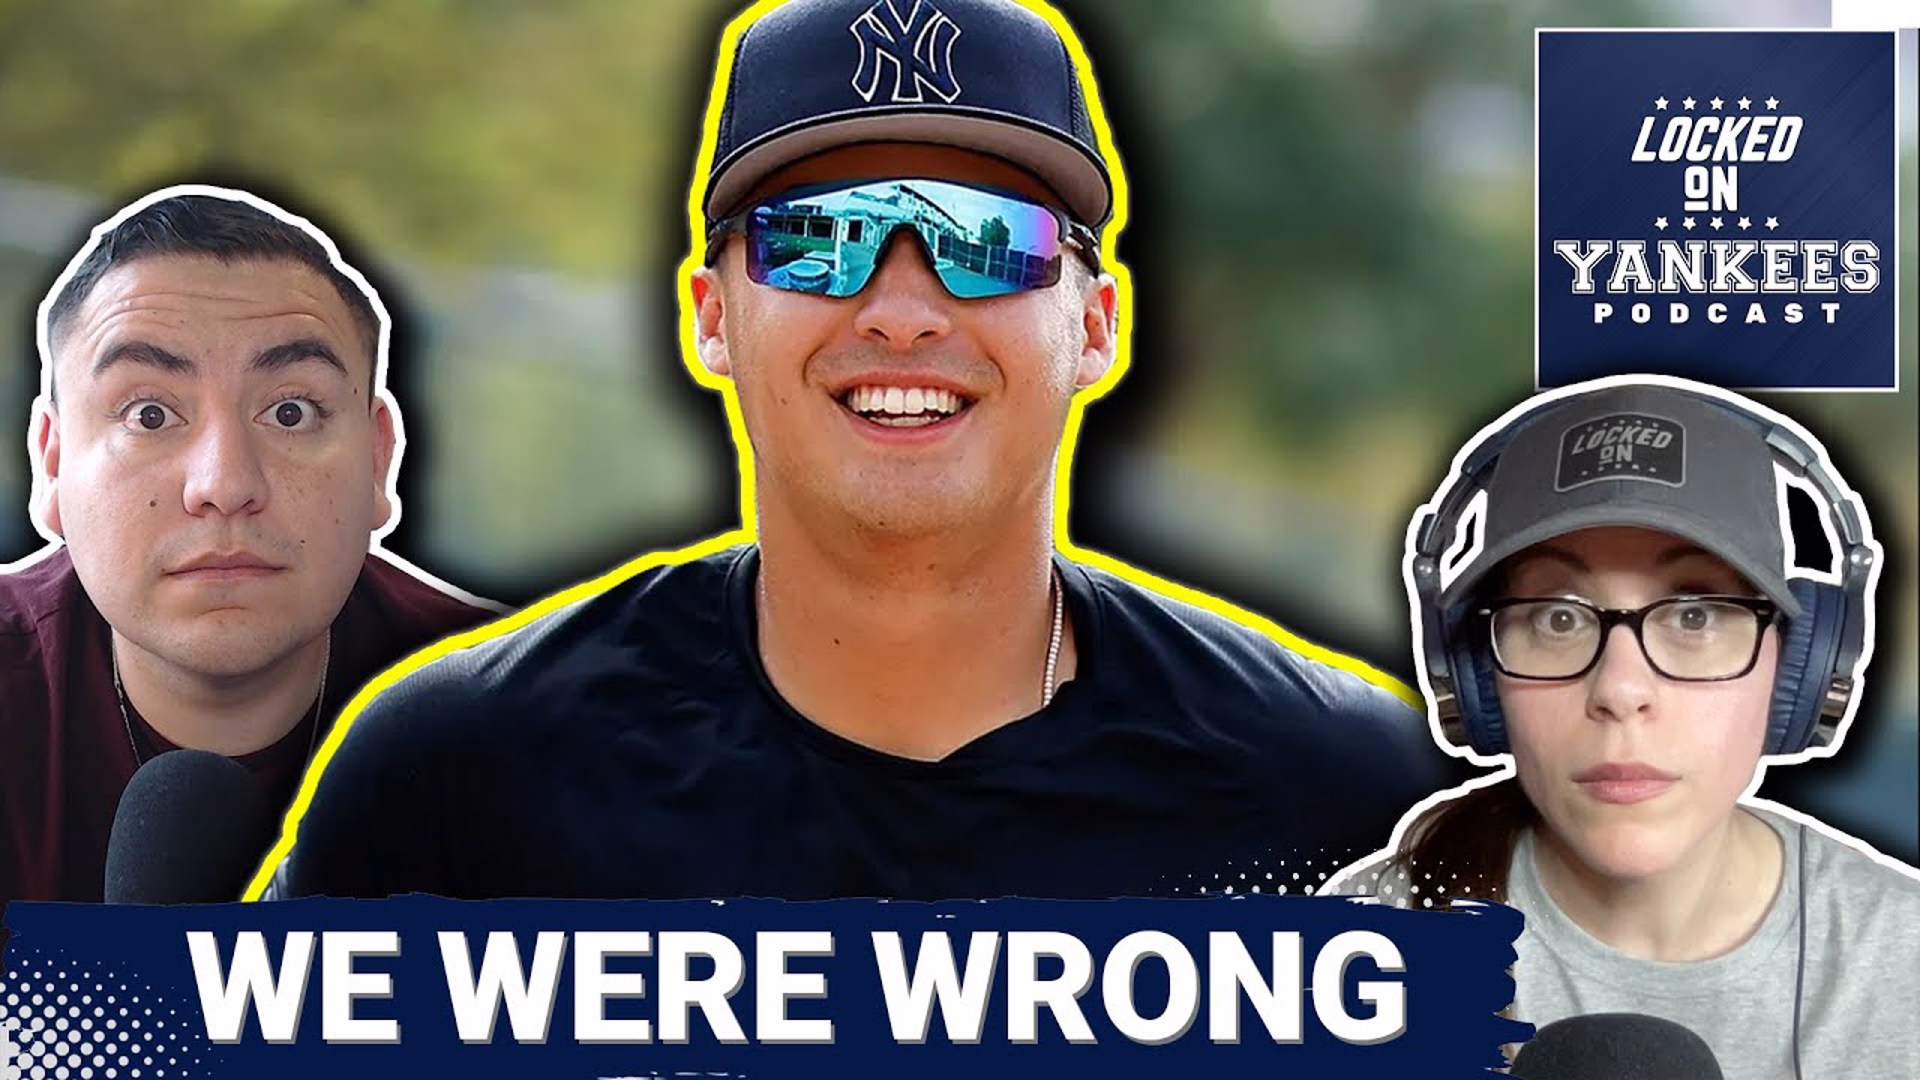 Stacey and Steve admit they were wrong about Anthony Volpe after comments that New York Yankees manager Aaron Boone made about the young infielder.